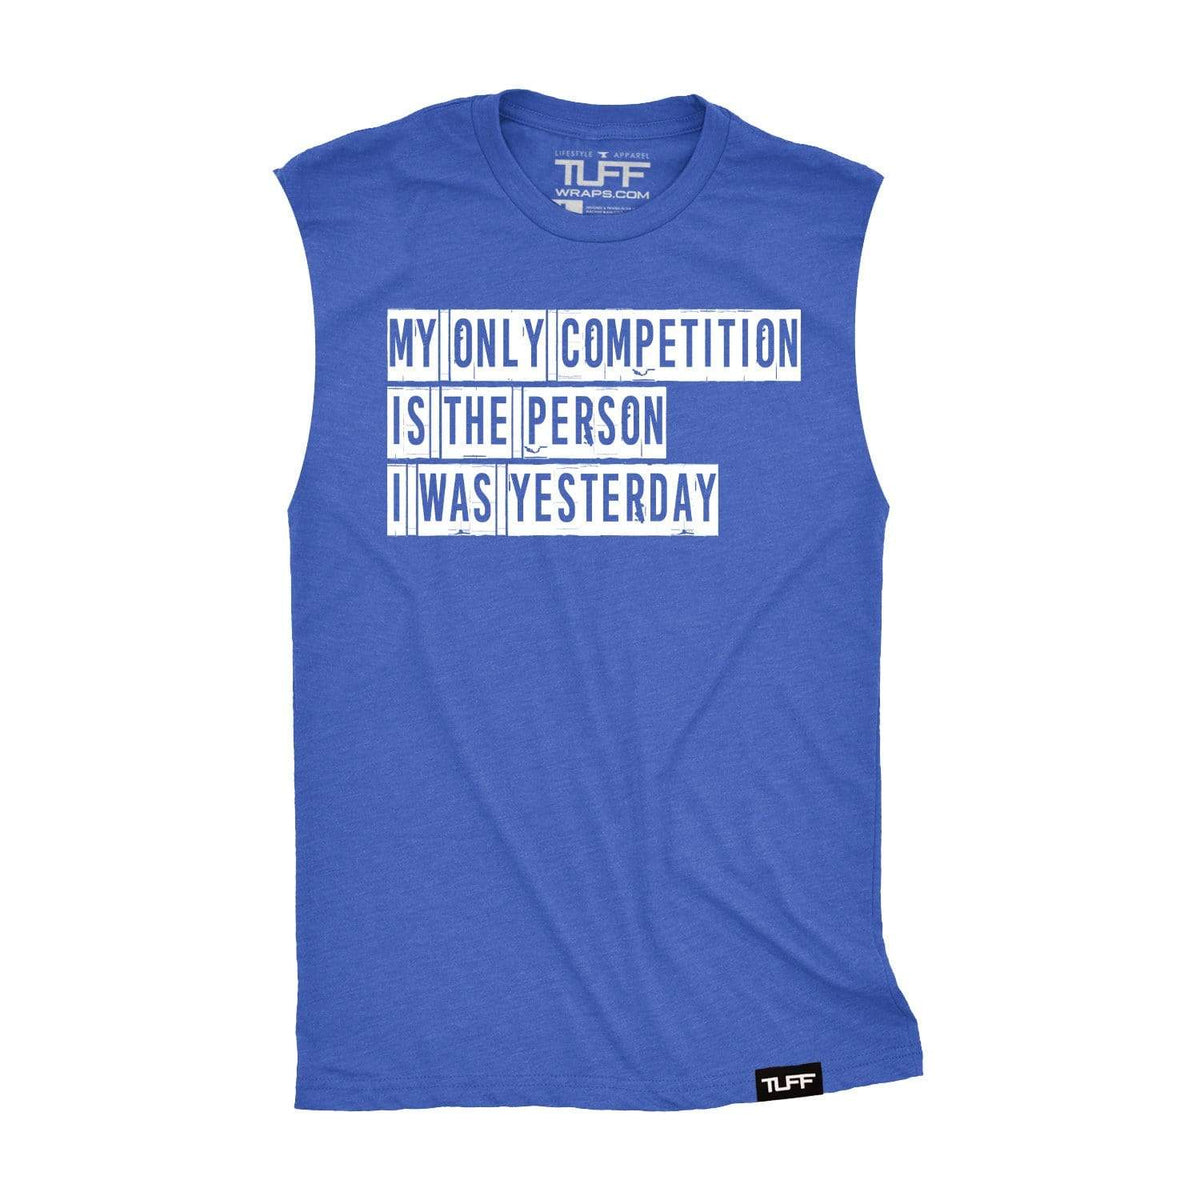 My Only Competition Raw Edge Muscle Tank S / Royal Blue TuffWraps.com